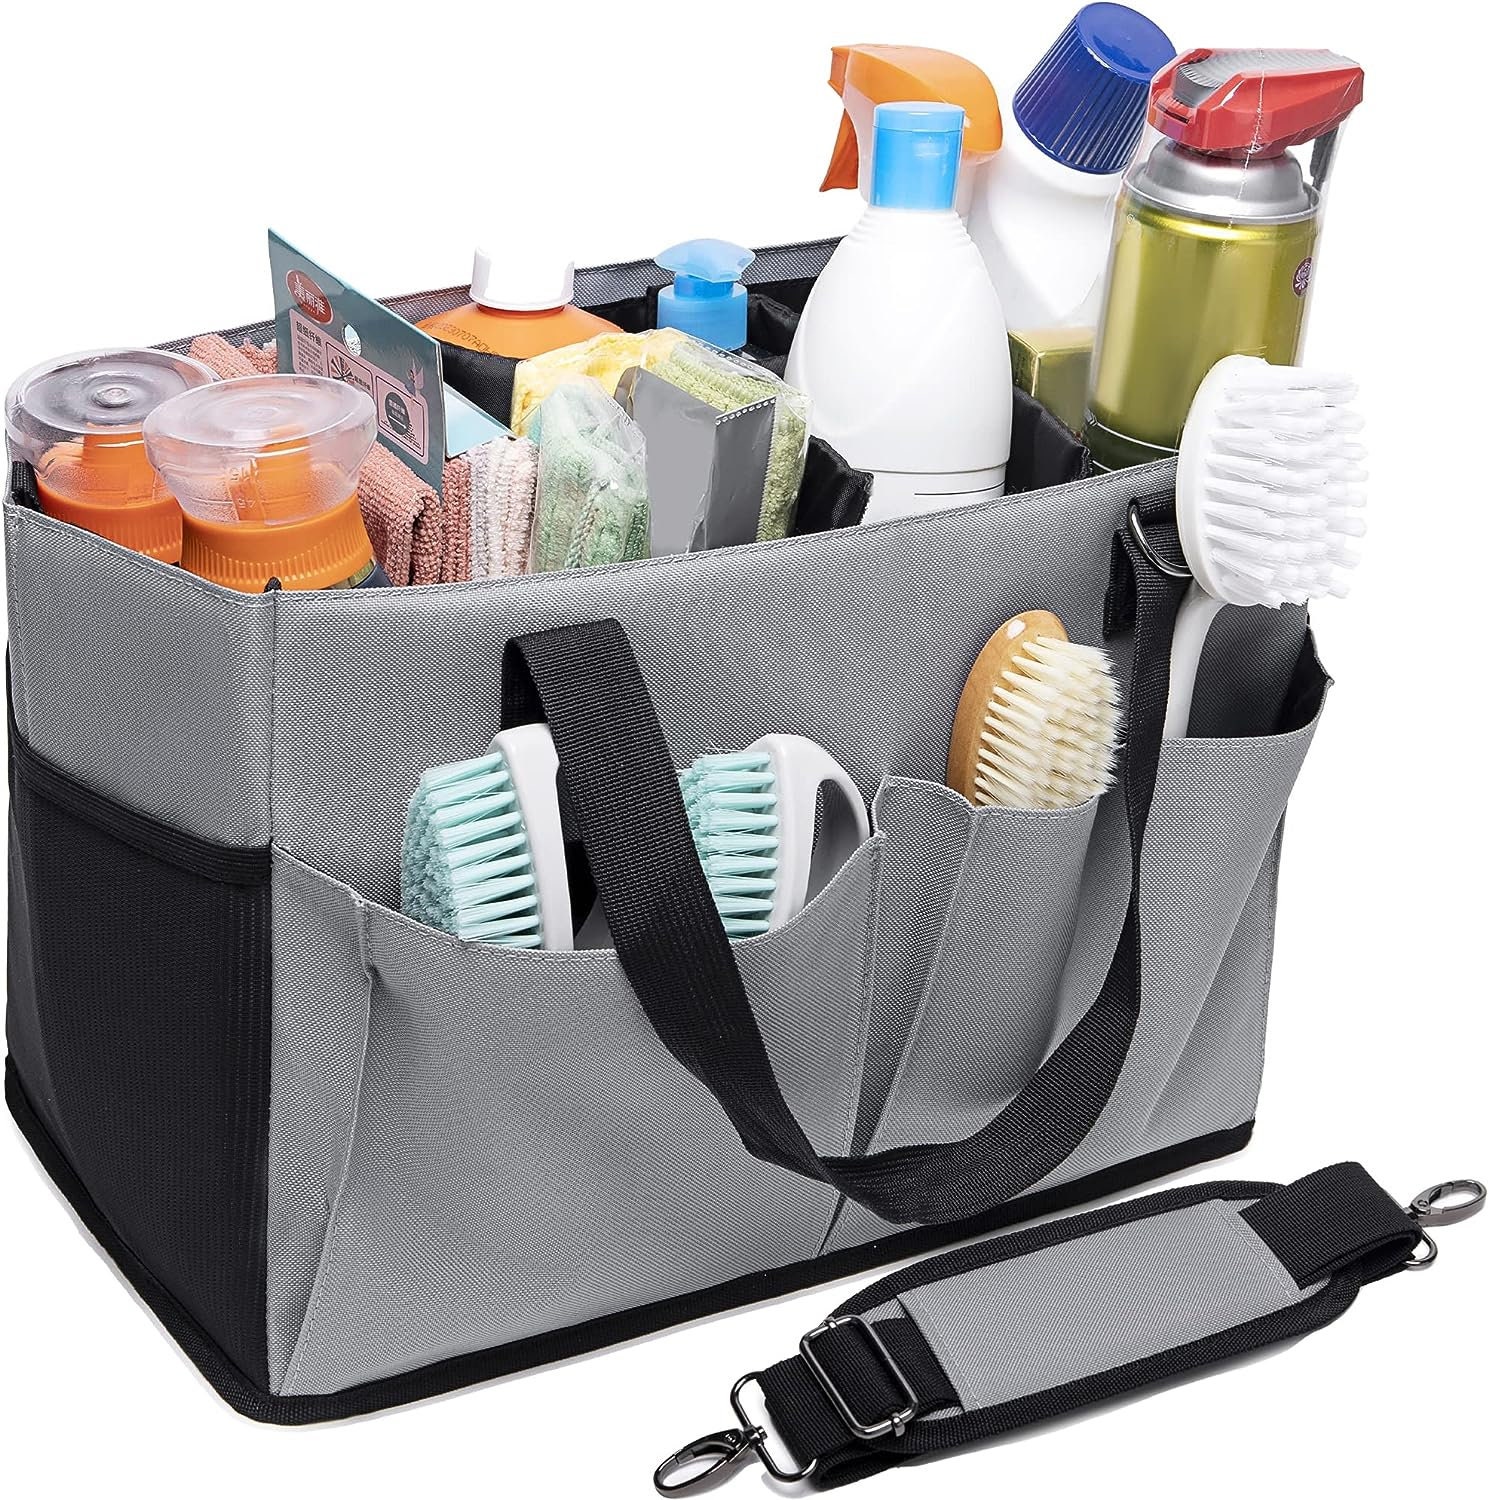 New Design Trapezoid Cleaning Supply Organizer Extra Large Cleaning Caddy  Bag with Handle - China Cleaning Caddy Bag and Cleaning Caddy Bag with  Handle price